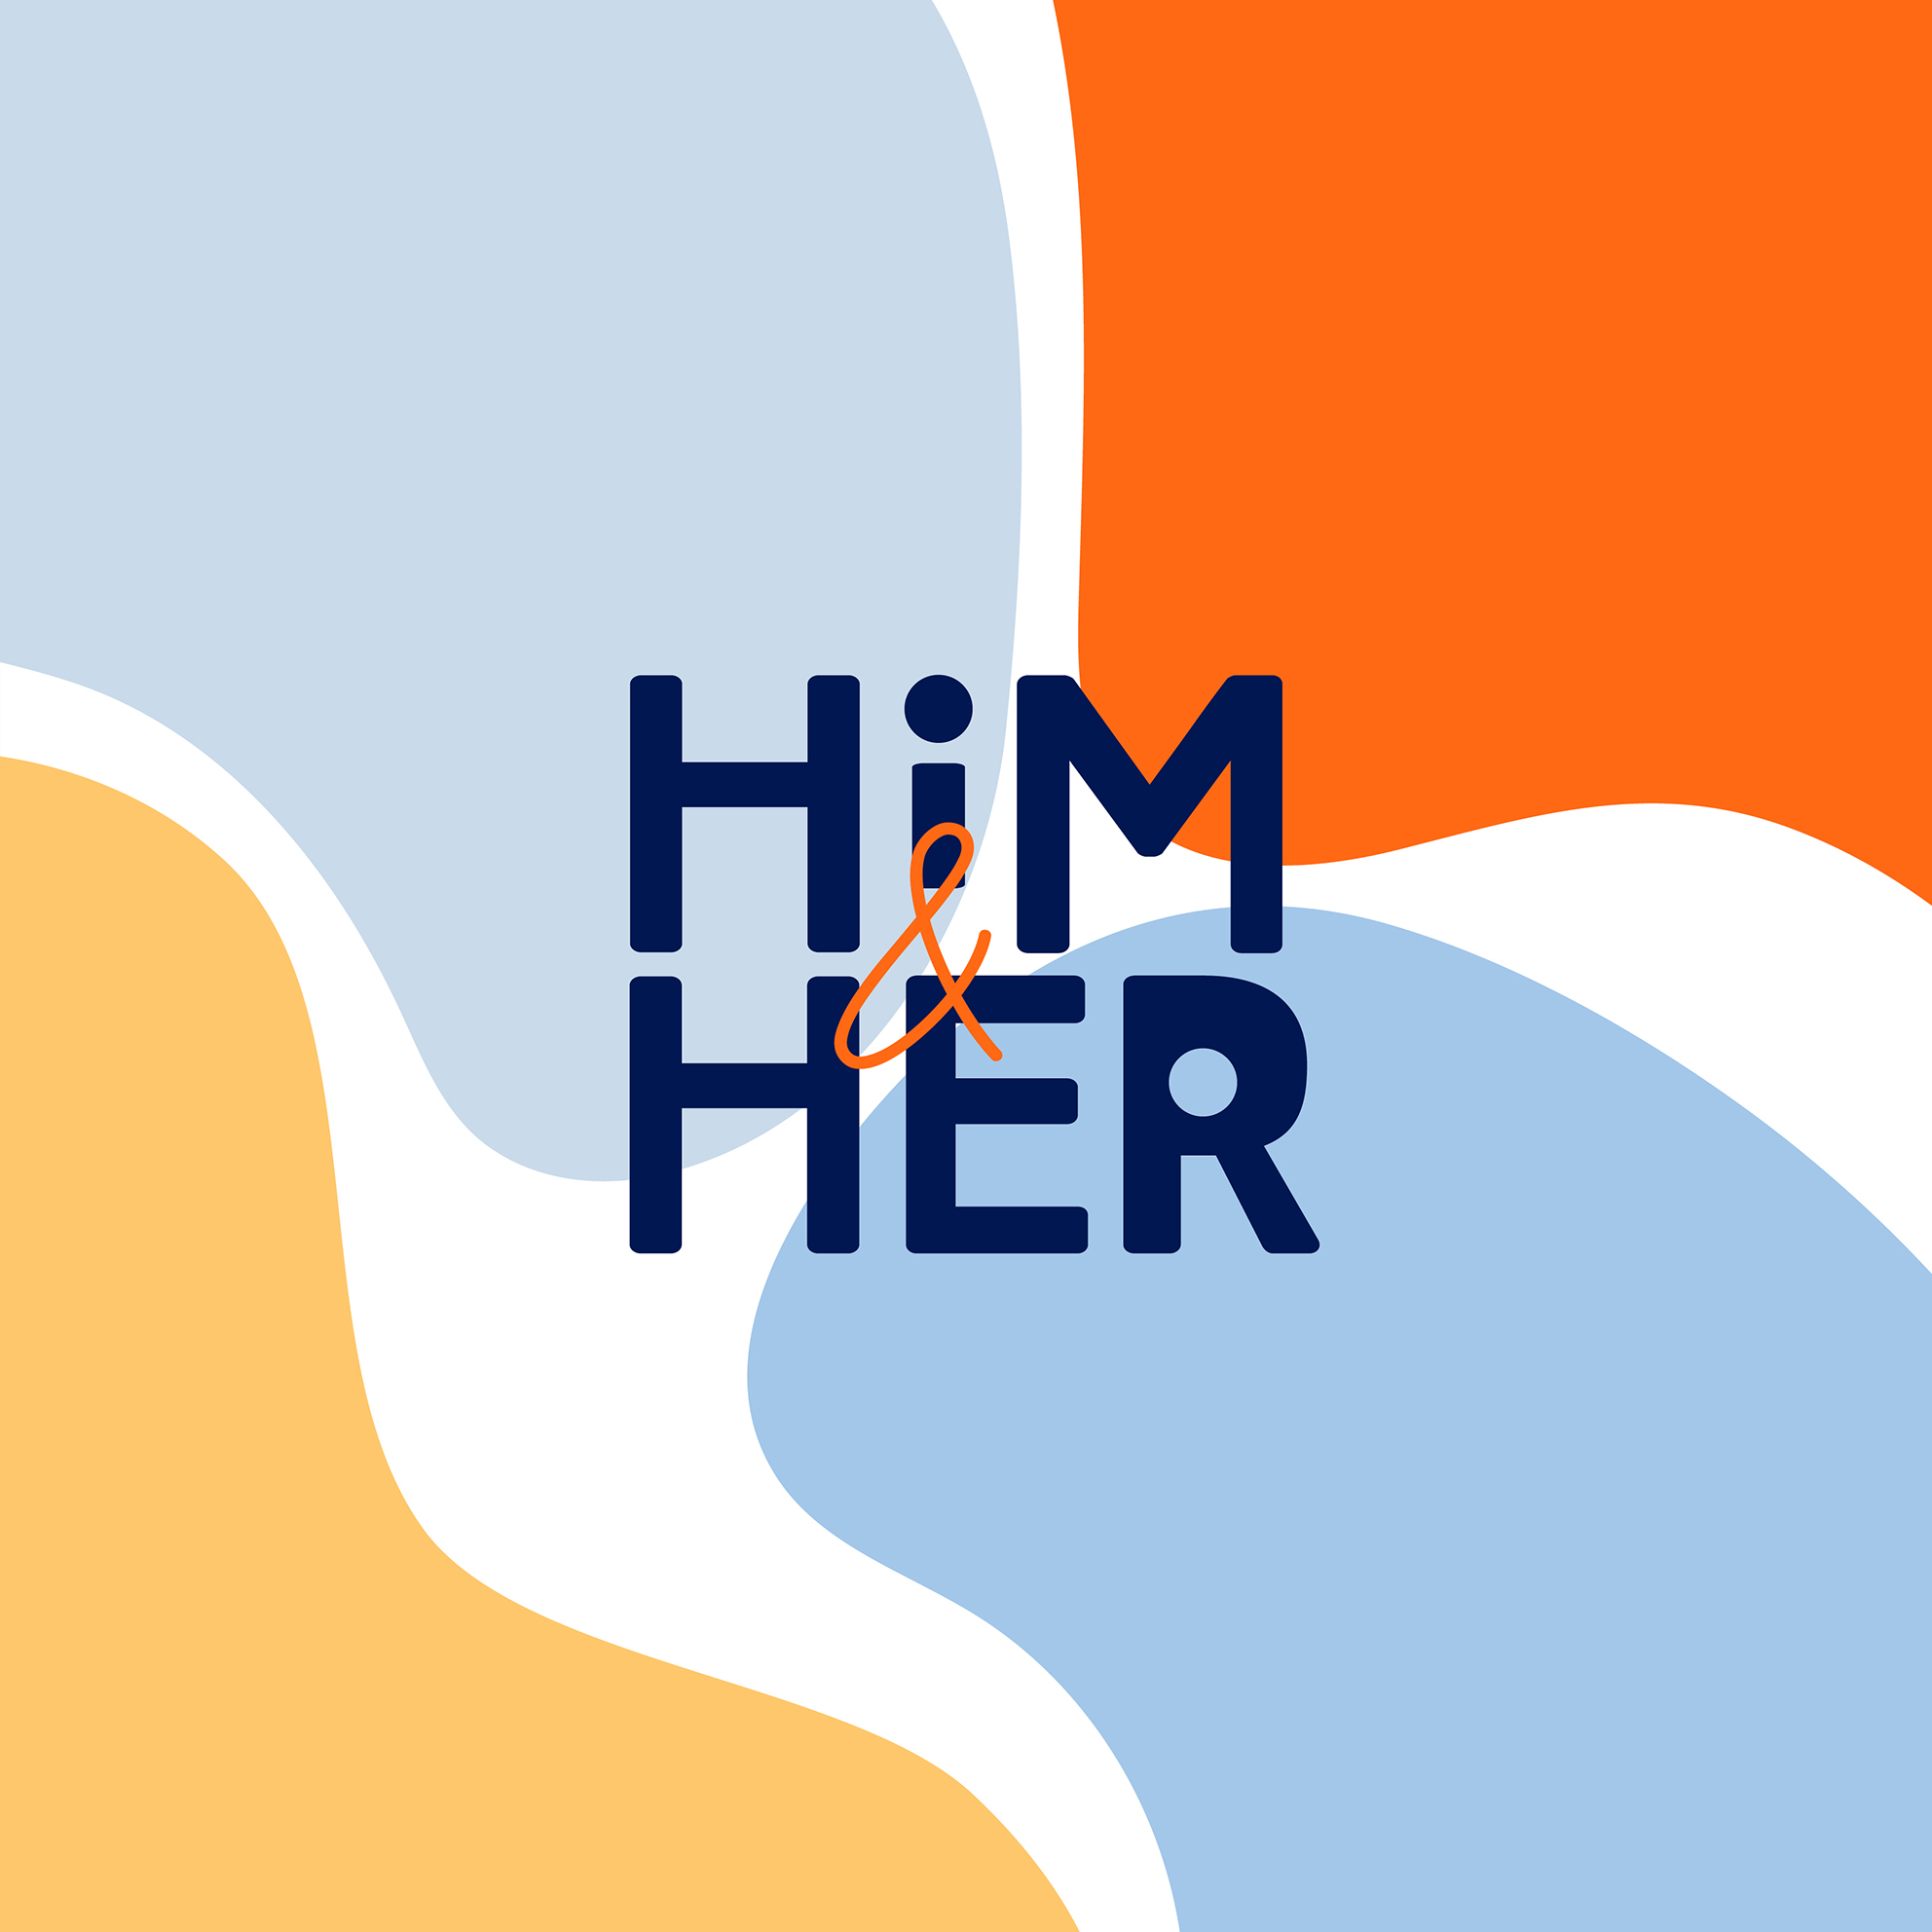 Him and Her Painting and Decorating Company Branding by Studio 53b